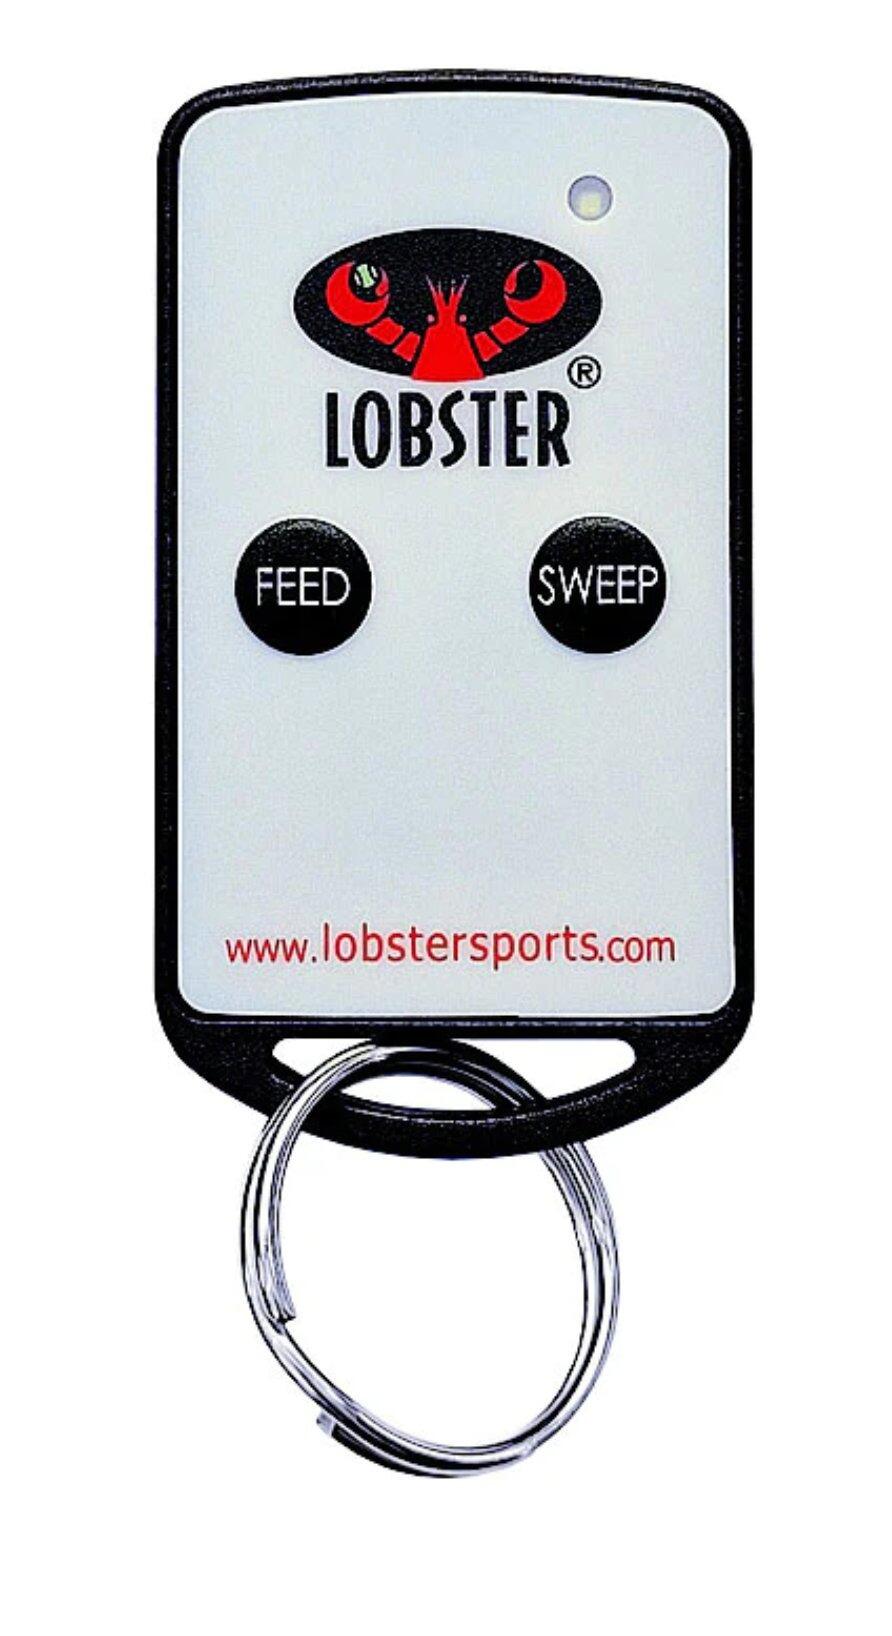 Up-to-date Lobster Elite 2-button remote